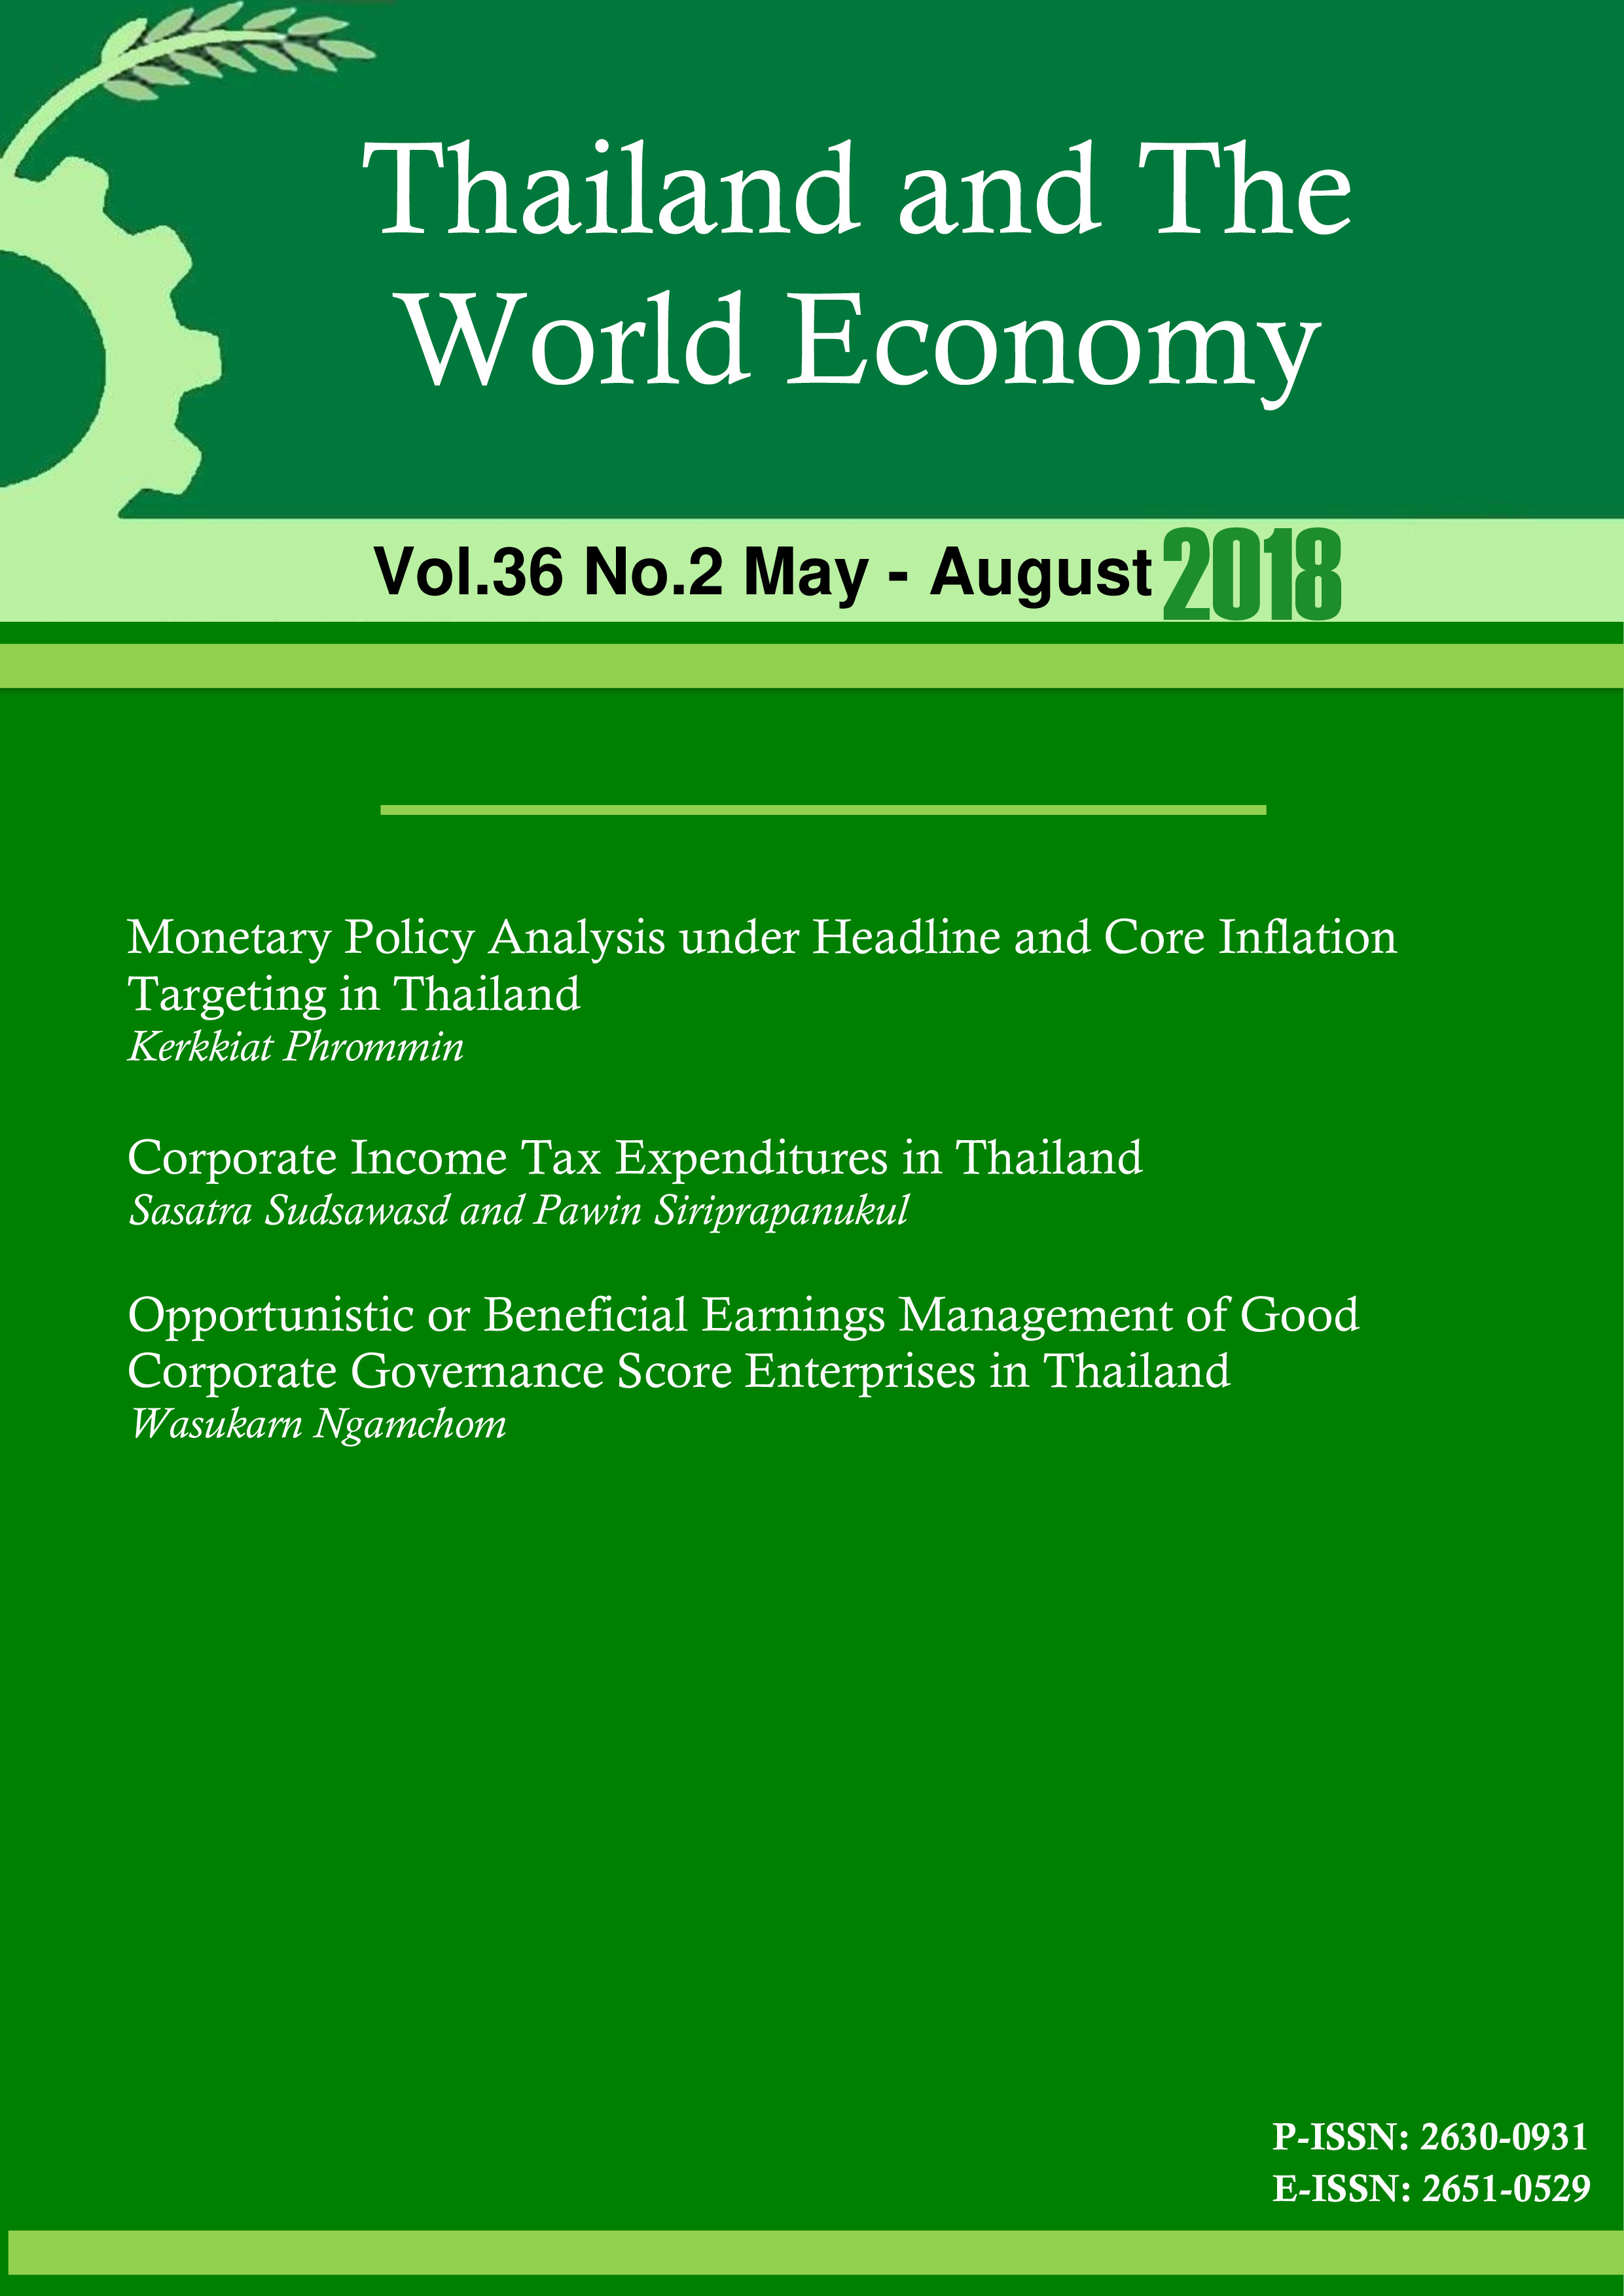 					View Vol. 36 No. 2 (2018): Thailand and The World Economy
				